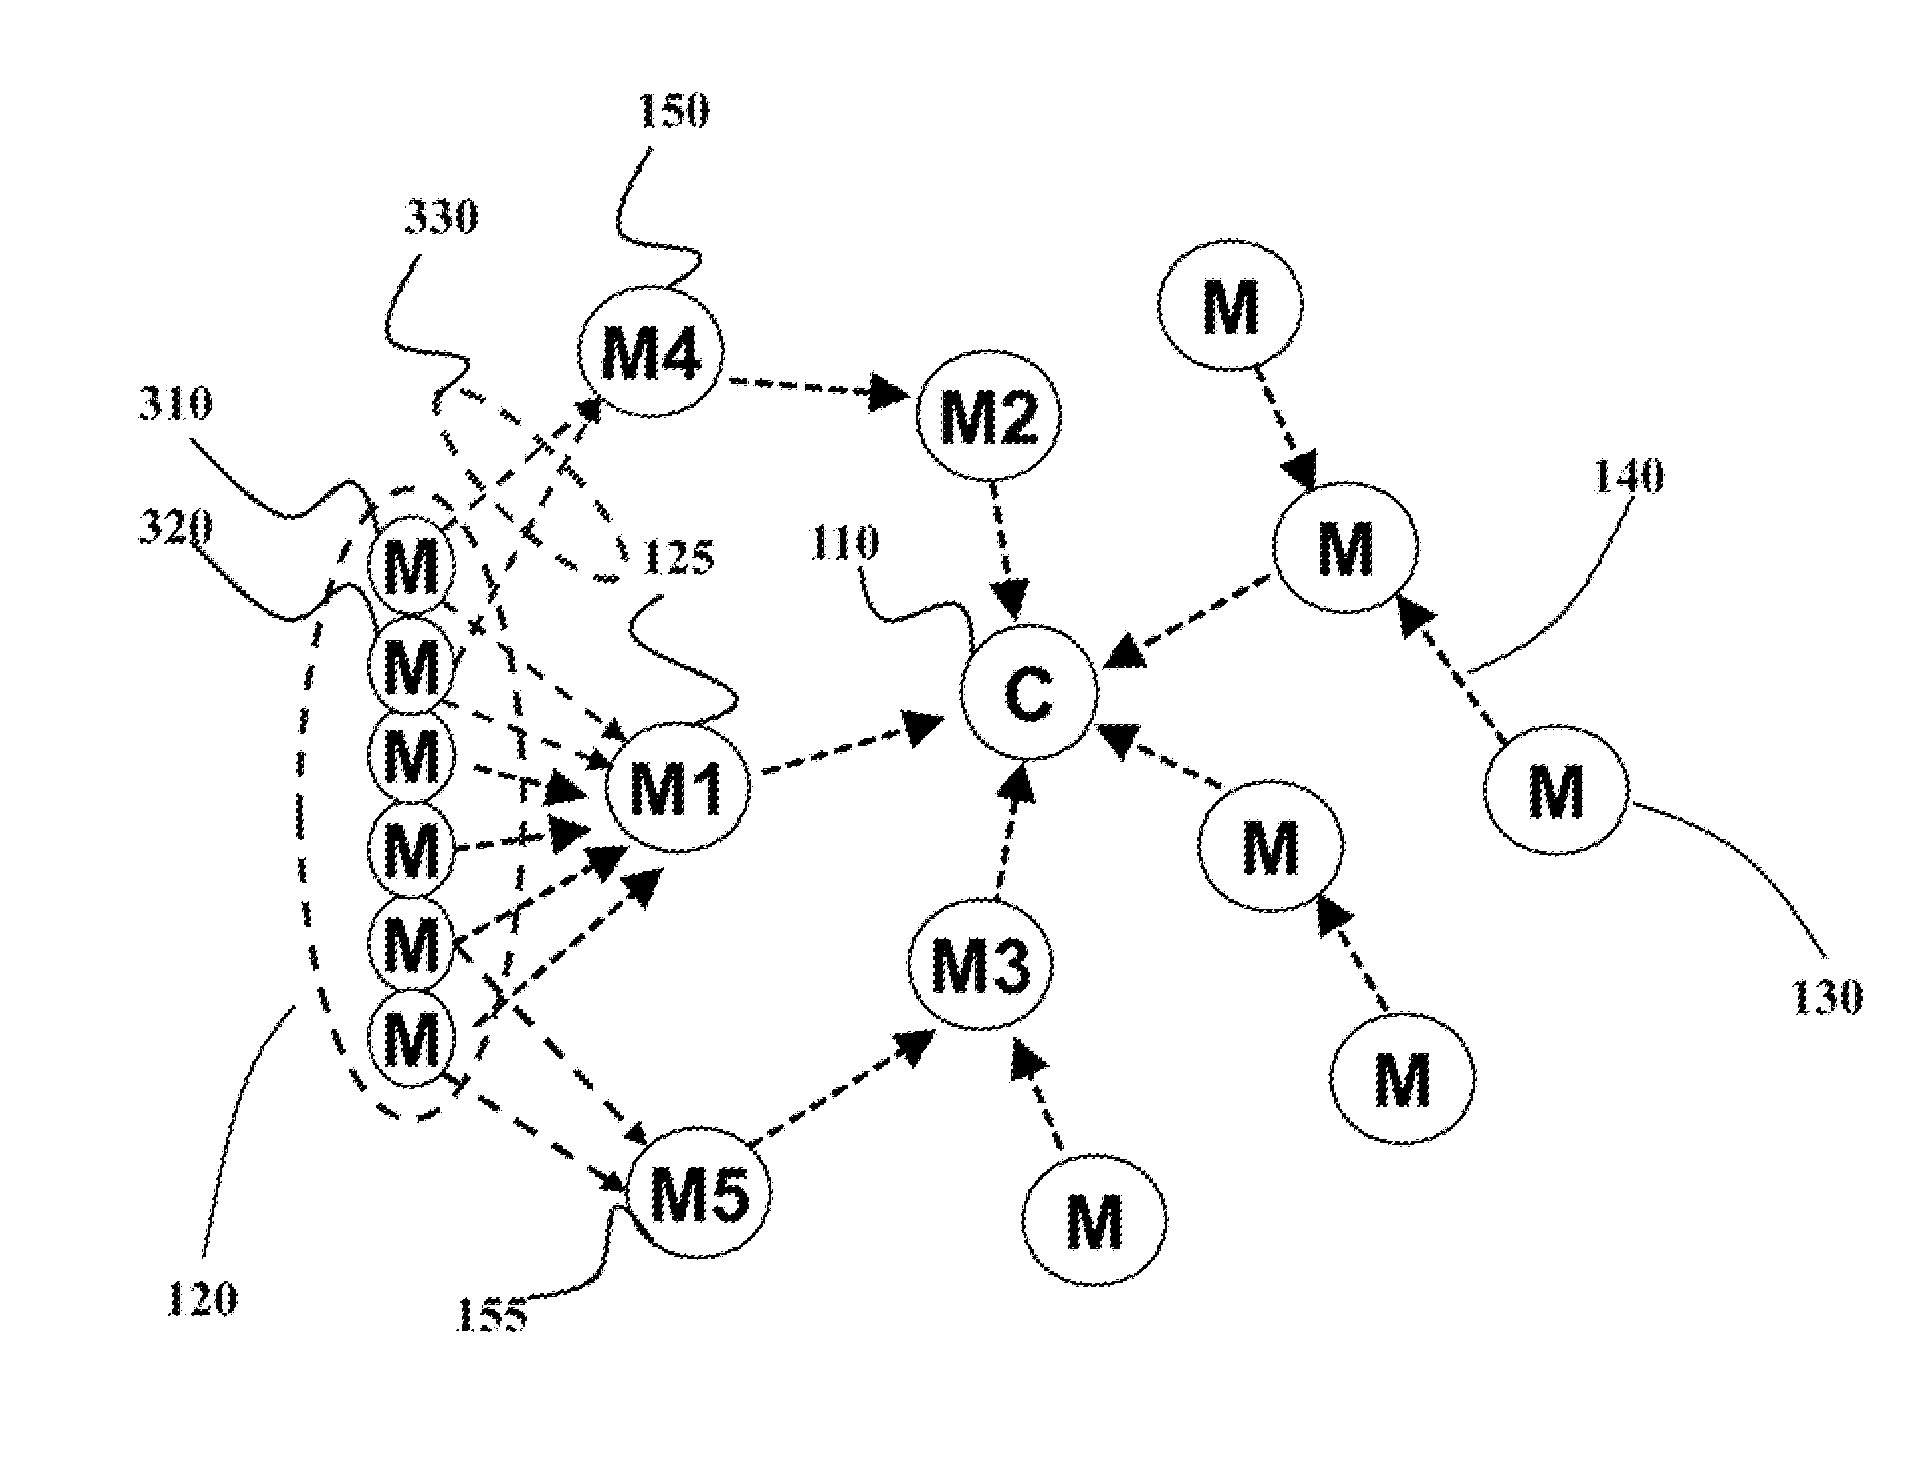 Load Balanced Routing for Low Power and Lossy Networks